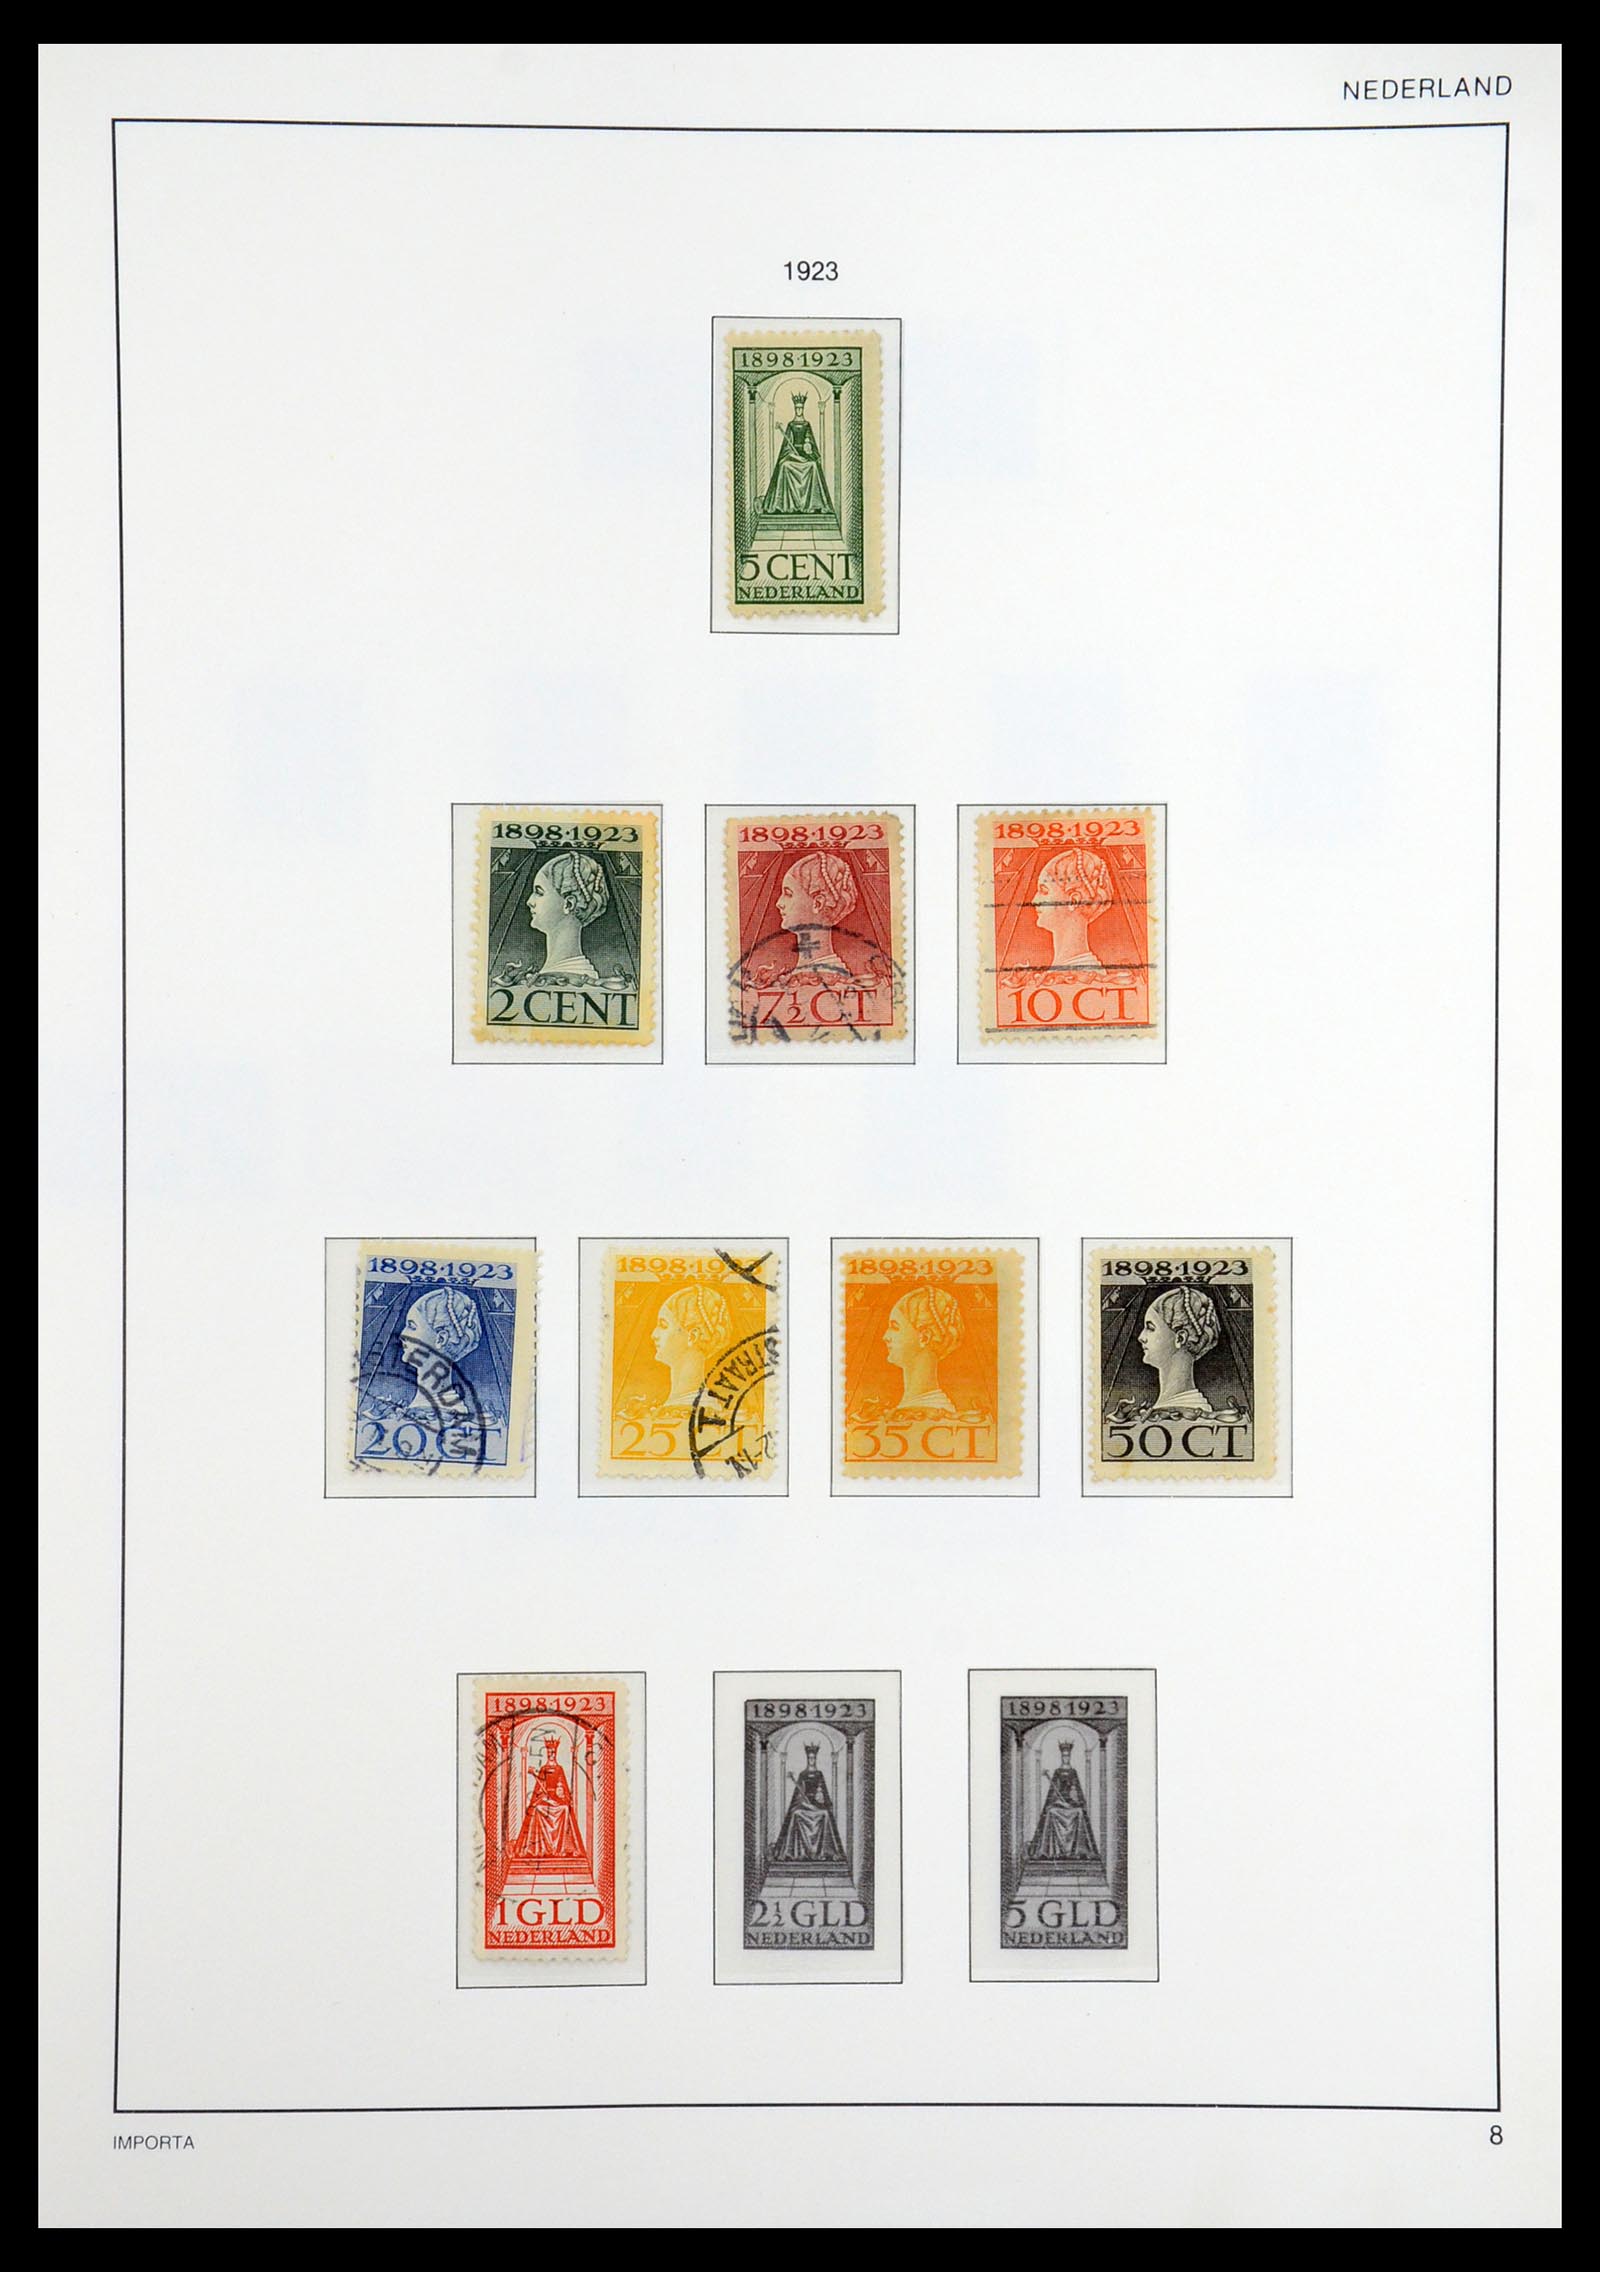 36544 009 - Stamp collection 36544 Netherlands 1852-1958.